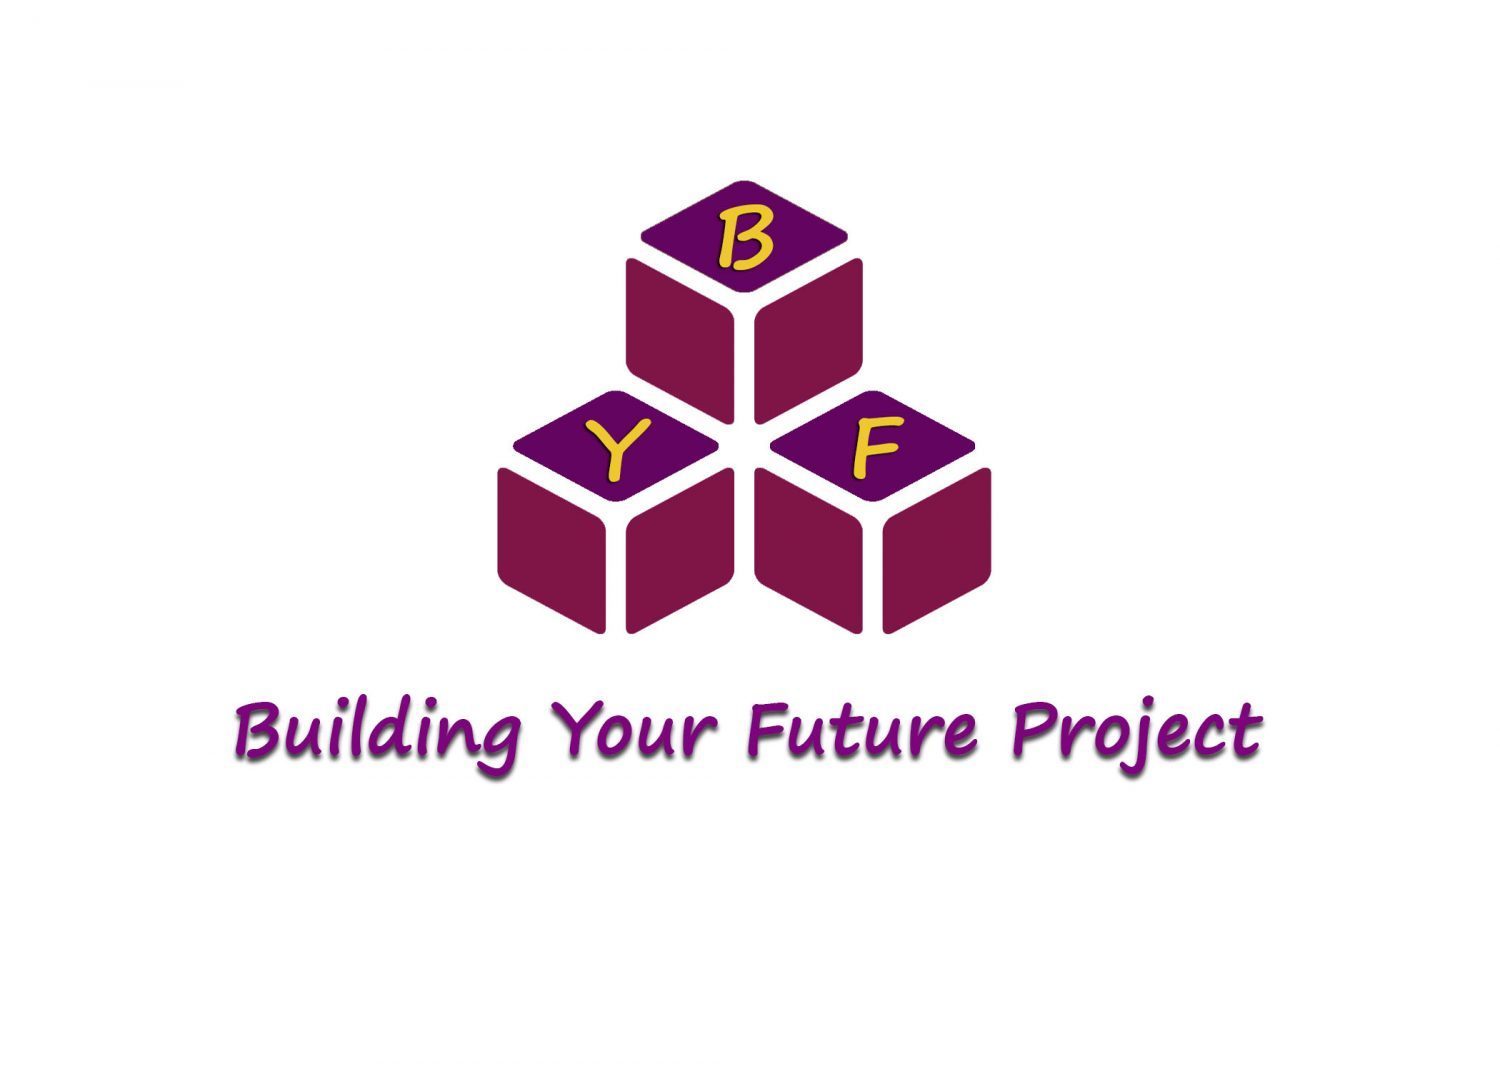 Call 3 Building Your Future Employability Project